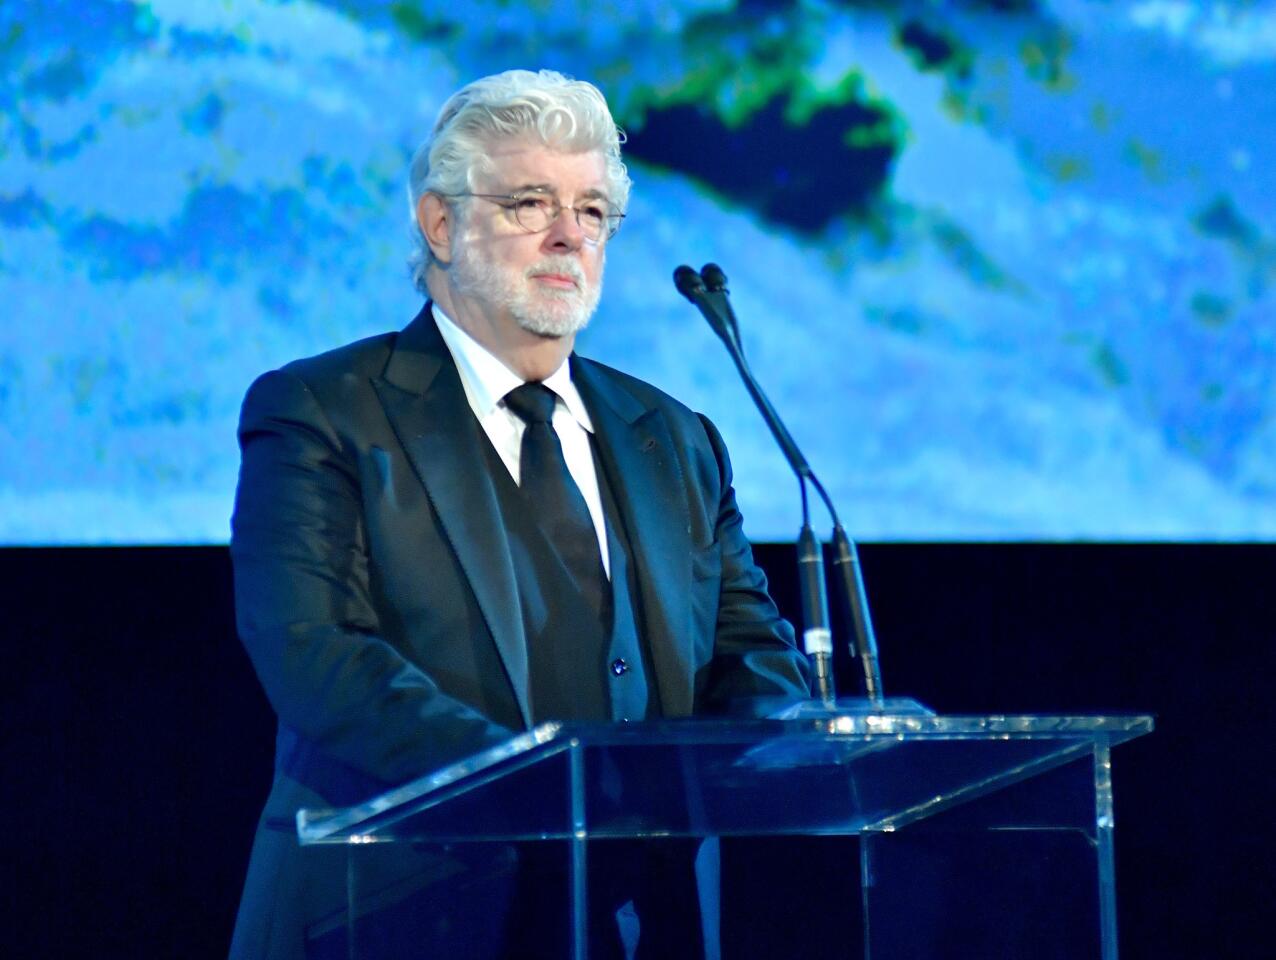 Honoree George Lucas accepts an award during the 2017 LACMA Art + Film Gala Honoring Mark Bradford and George Lucas at LACMA in Los Angeles.